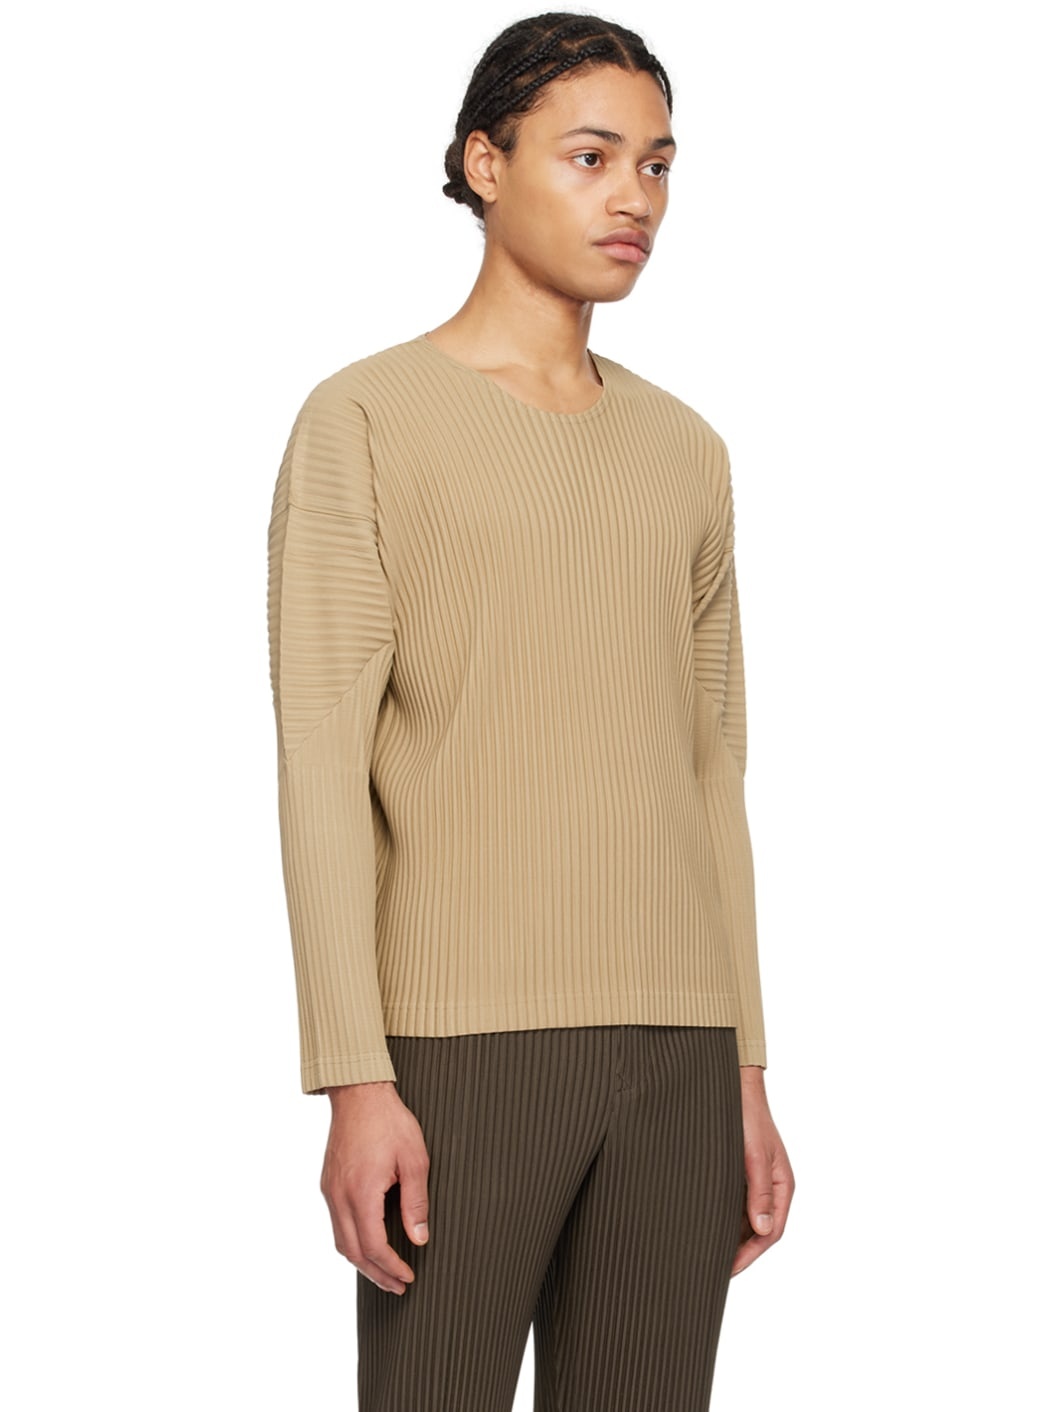 Beige Monthly Color February T-Shirt - 2